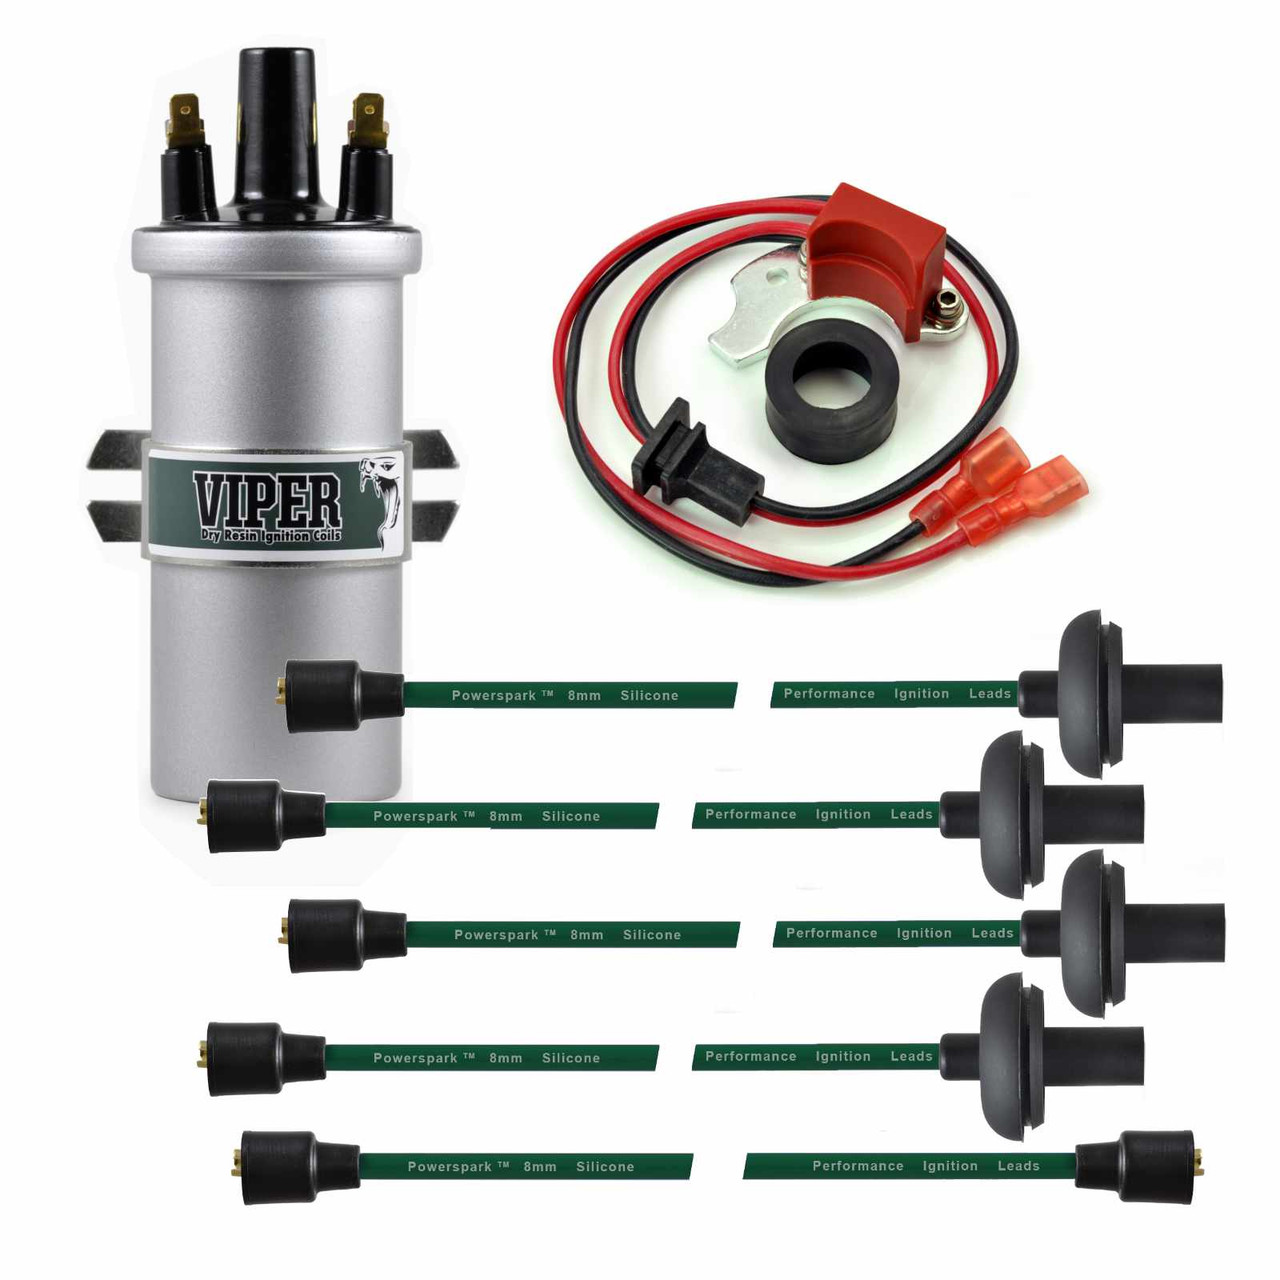 Air Cooled Volkswagen Electronic Ignition Bundle Viper Coil, Ignition Conversion Kit, Green HT Leads